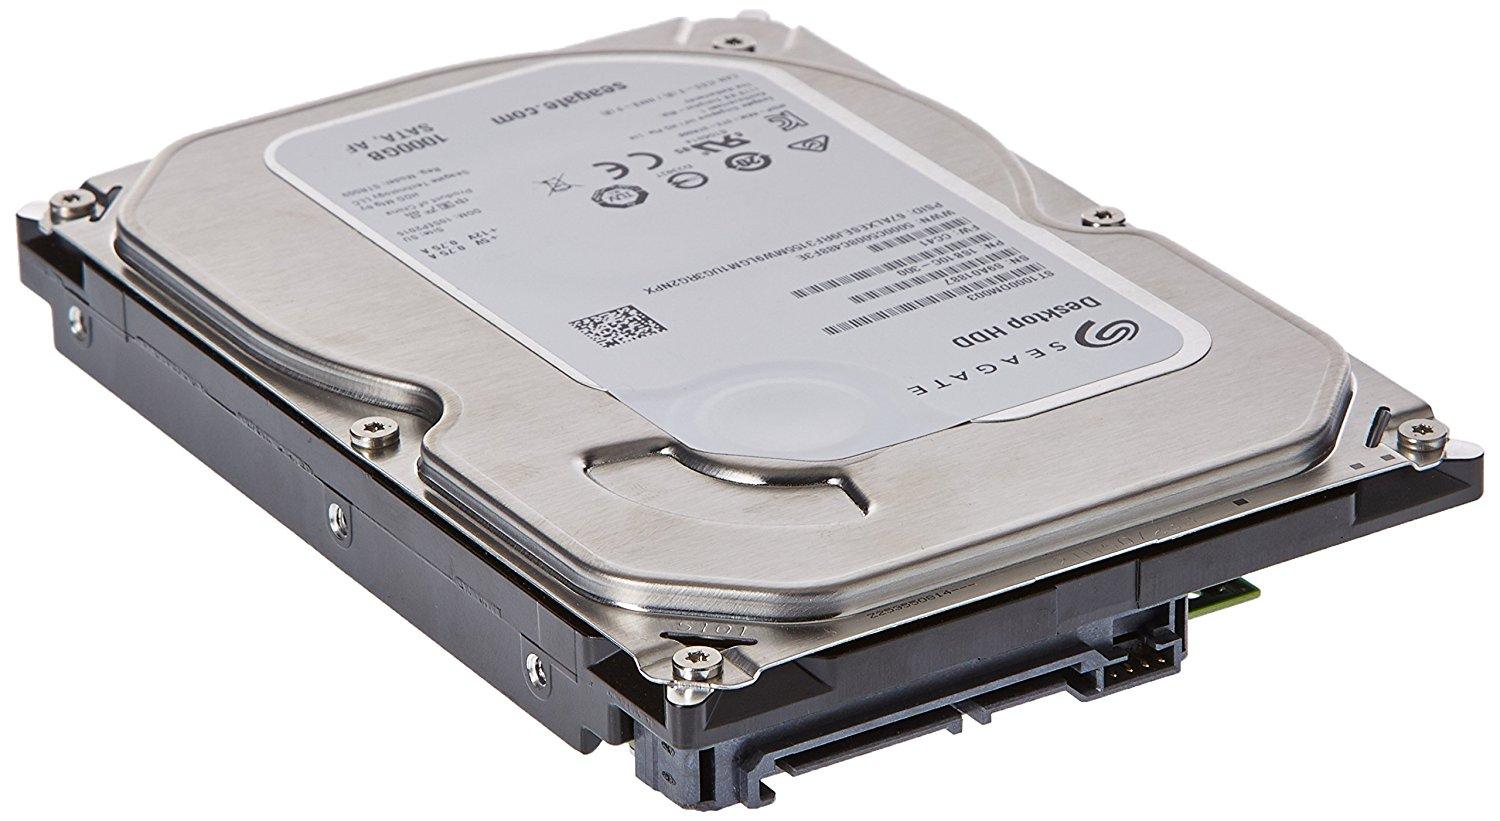 SATA 6Gbps Hard Drives for Servers, Storage, and Workstations